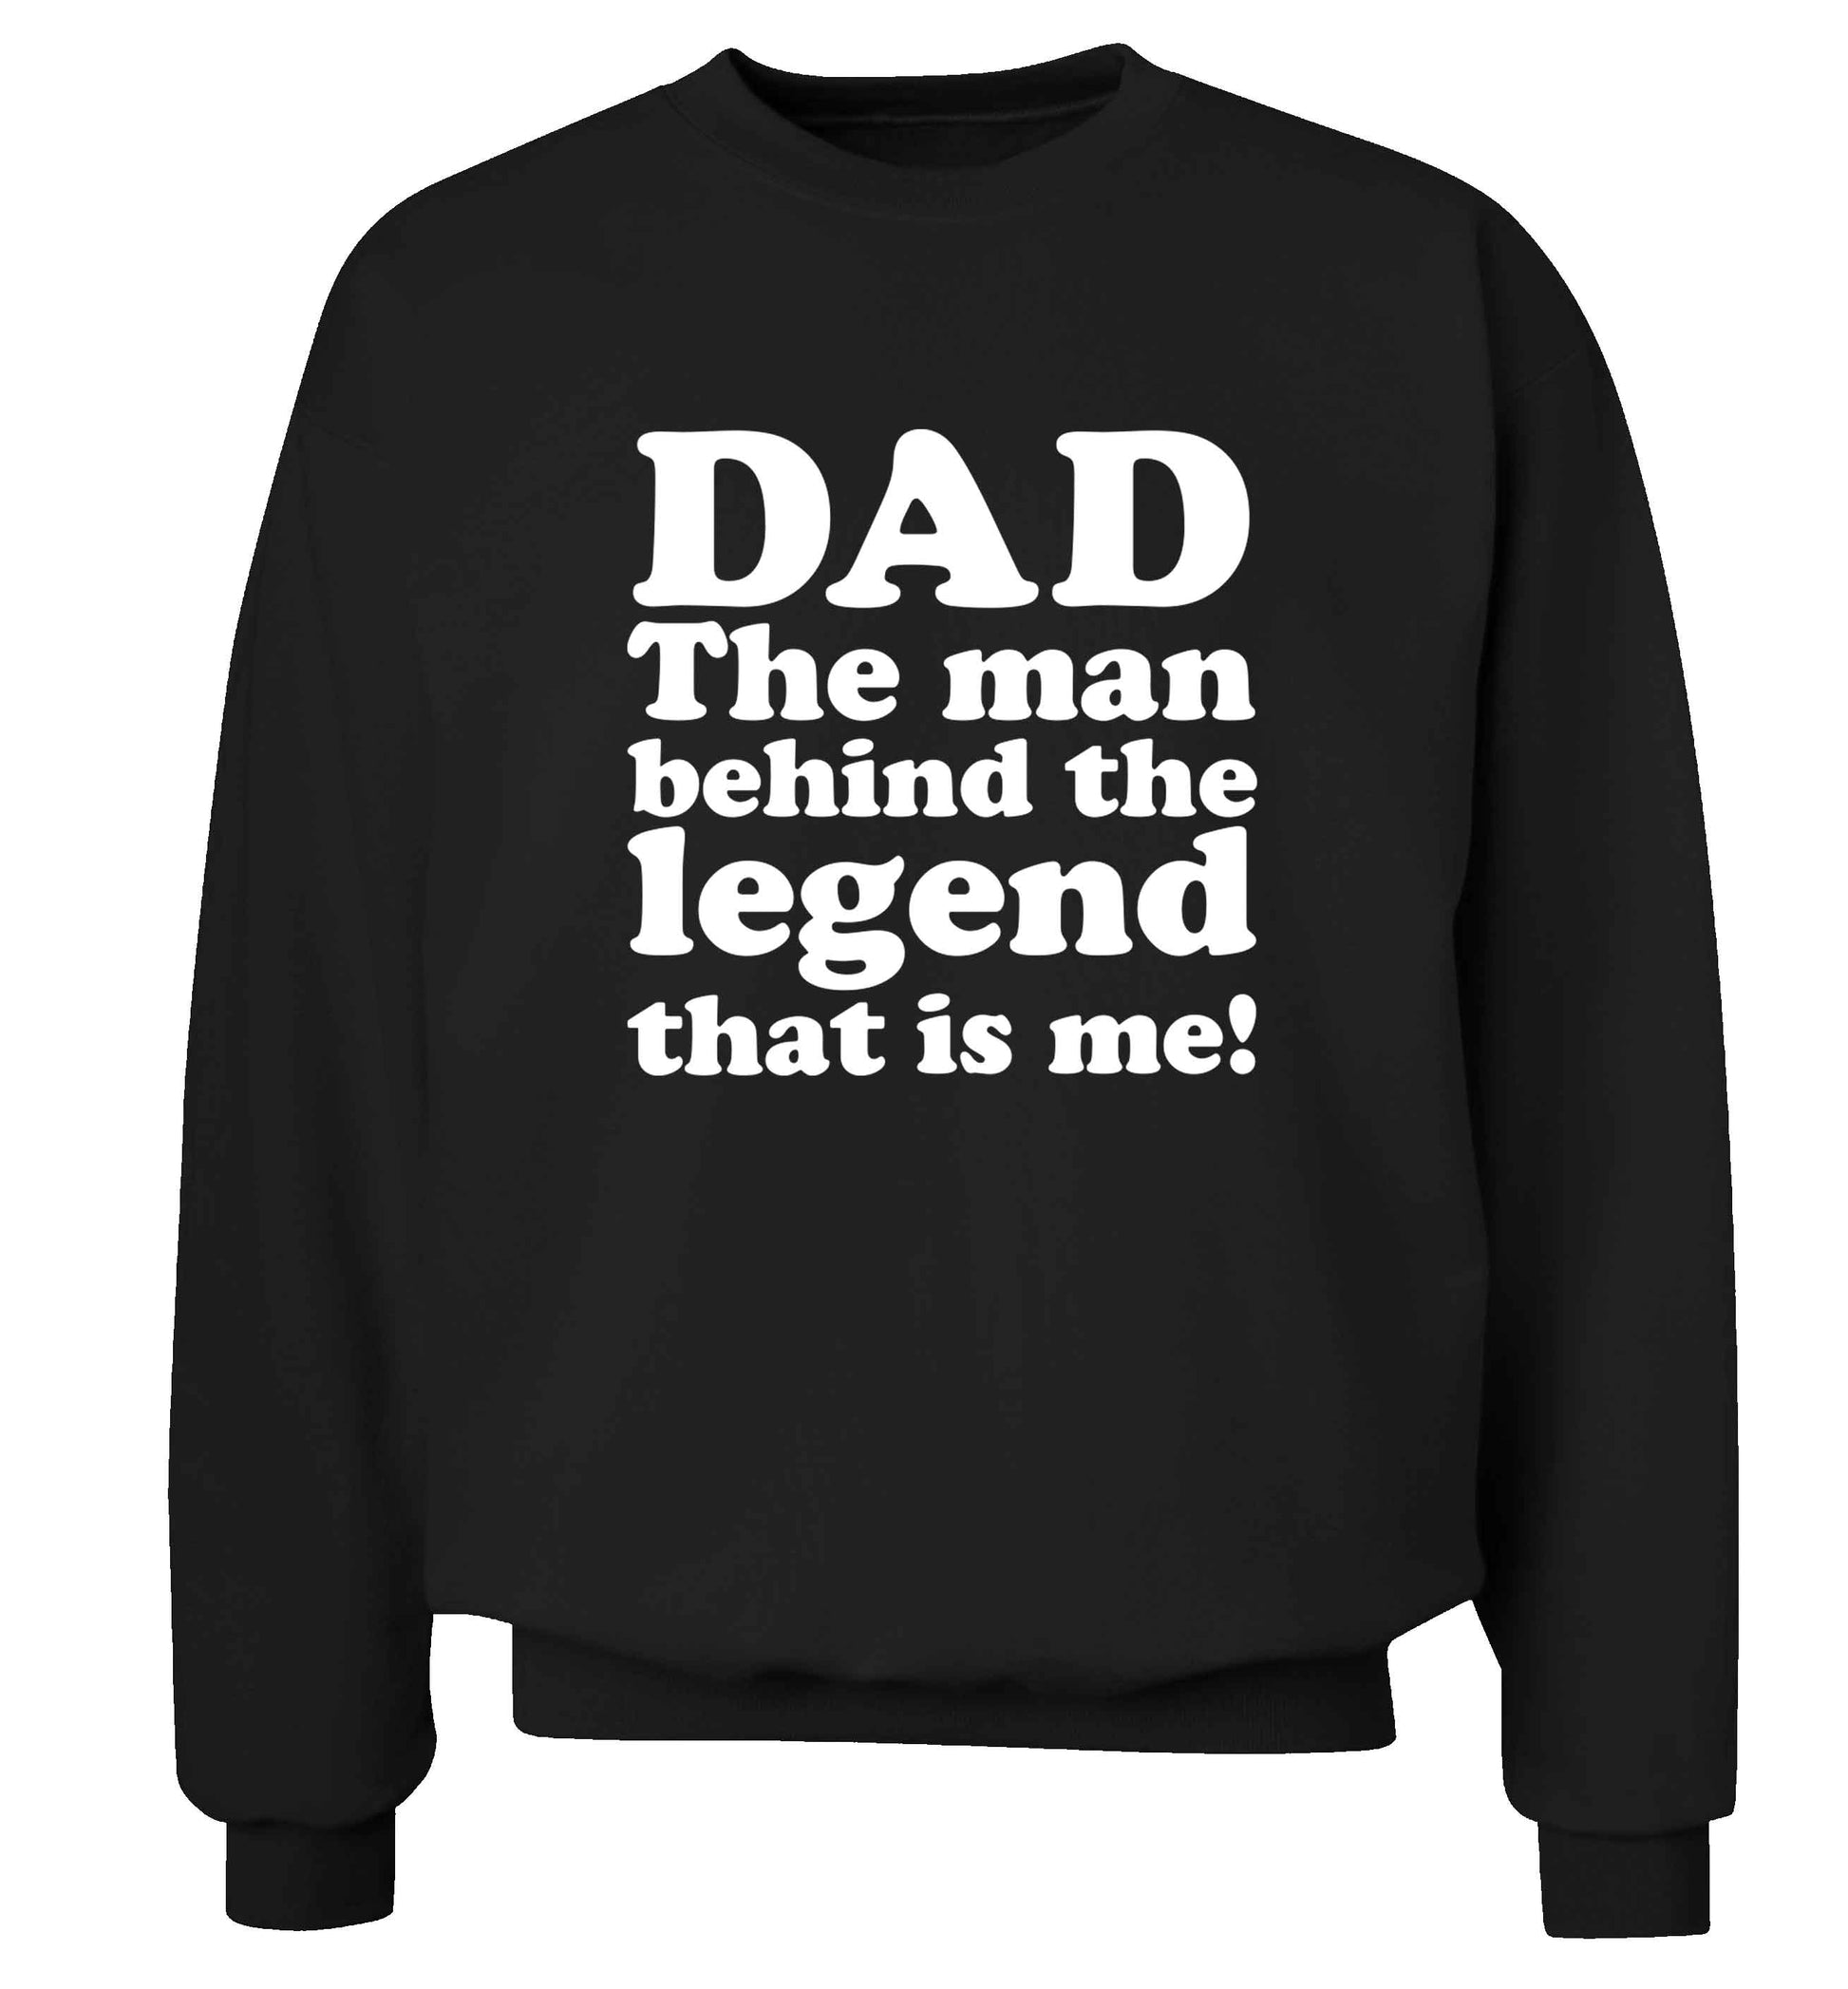 Dad the man behind the legend that is me adult's unisex black sweater 2XL